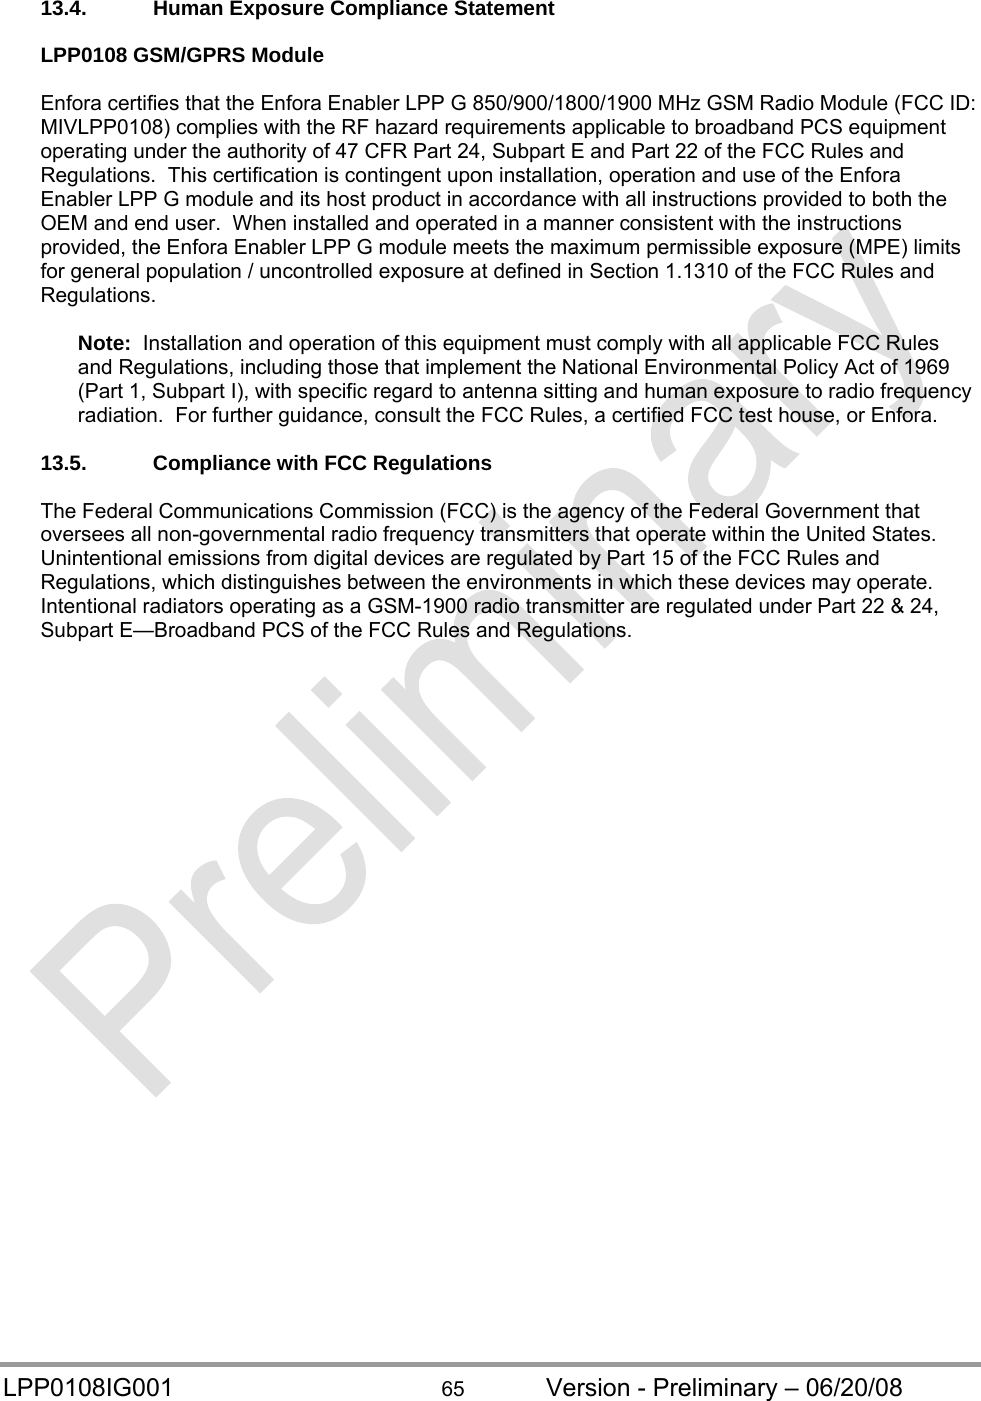  LPP0108IG001  65  Version - Preliminary – 06/20/08 13.4.  Human Exposure Compliance Statement  LPP0108 GSM/GPRS Module  Enfora certifies that the Enfora Enabler LPP G 850/900/1800/1900 MHz GSM Radio Module (FCC ID: MIVLPP0108) complies with the RF hazard requirements applicable to broadband PCS equipment operating under the authority of 47 CFR Part 24, Subpart E and Part 22 of the FCC Rules and Regulations.  This certification is contingent upon installation, operation and use of the Enfora Enabler LPP G module and its host product in accordance with all instructions provided to both the OEM and end user.  When installed and operated in a manner consistent with the instructions provided, the Enfora Enabler LPP G module meets the maximum permissible exposure (MPE) limits for general population / uncontrolled exposure at defined in Section 1.1310 of the FCC Rules and Regulations.  Note:  Installation and operation of this equipment must comply with all applicable FCC Rules and Regulations, including those that implement the National Environmental Policy Act of 1969 (Part 1, Subpart I), with specific regard to antenna sitting and human exposure to radio frequency radiation.  For further guidance, consult the FCC Rules, a certified FCC test house, or Enfora.  13.5.  Compliance with FCC Regulations  The Federal Communications Commission (FCC) is the agency of the Federal Government that oversees all non-governmental radio frequency transmitters that operate within the United States.  Unintentional emissions from digital devices are regulated by Part 15 of the FCC Rules and Regulations, which distinguishes between the environments in which these devices may operate.  Intentional radiators operating as a GSM-1900 radio transmitter are regulated under Part 22 &amp; 24, Subpart E—Broadband PCS of the FCC Rules and Regulations.  